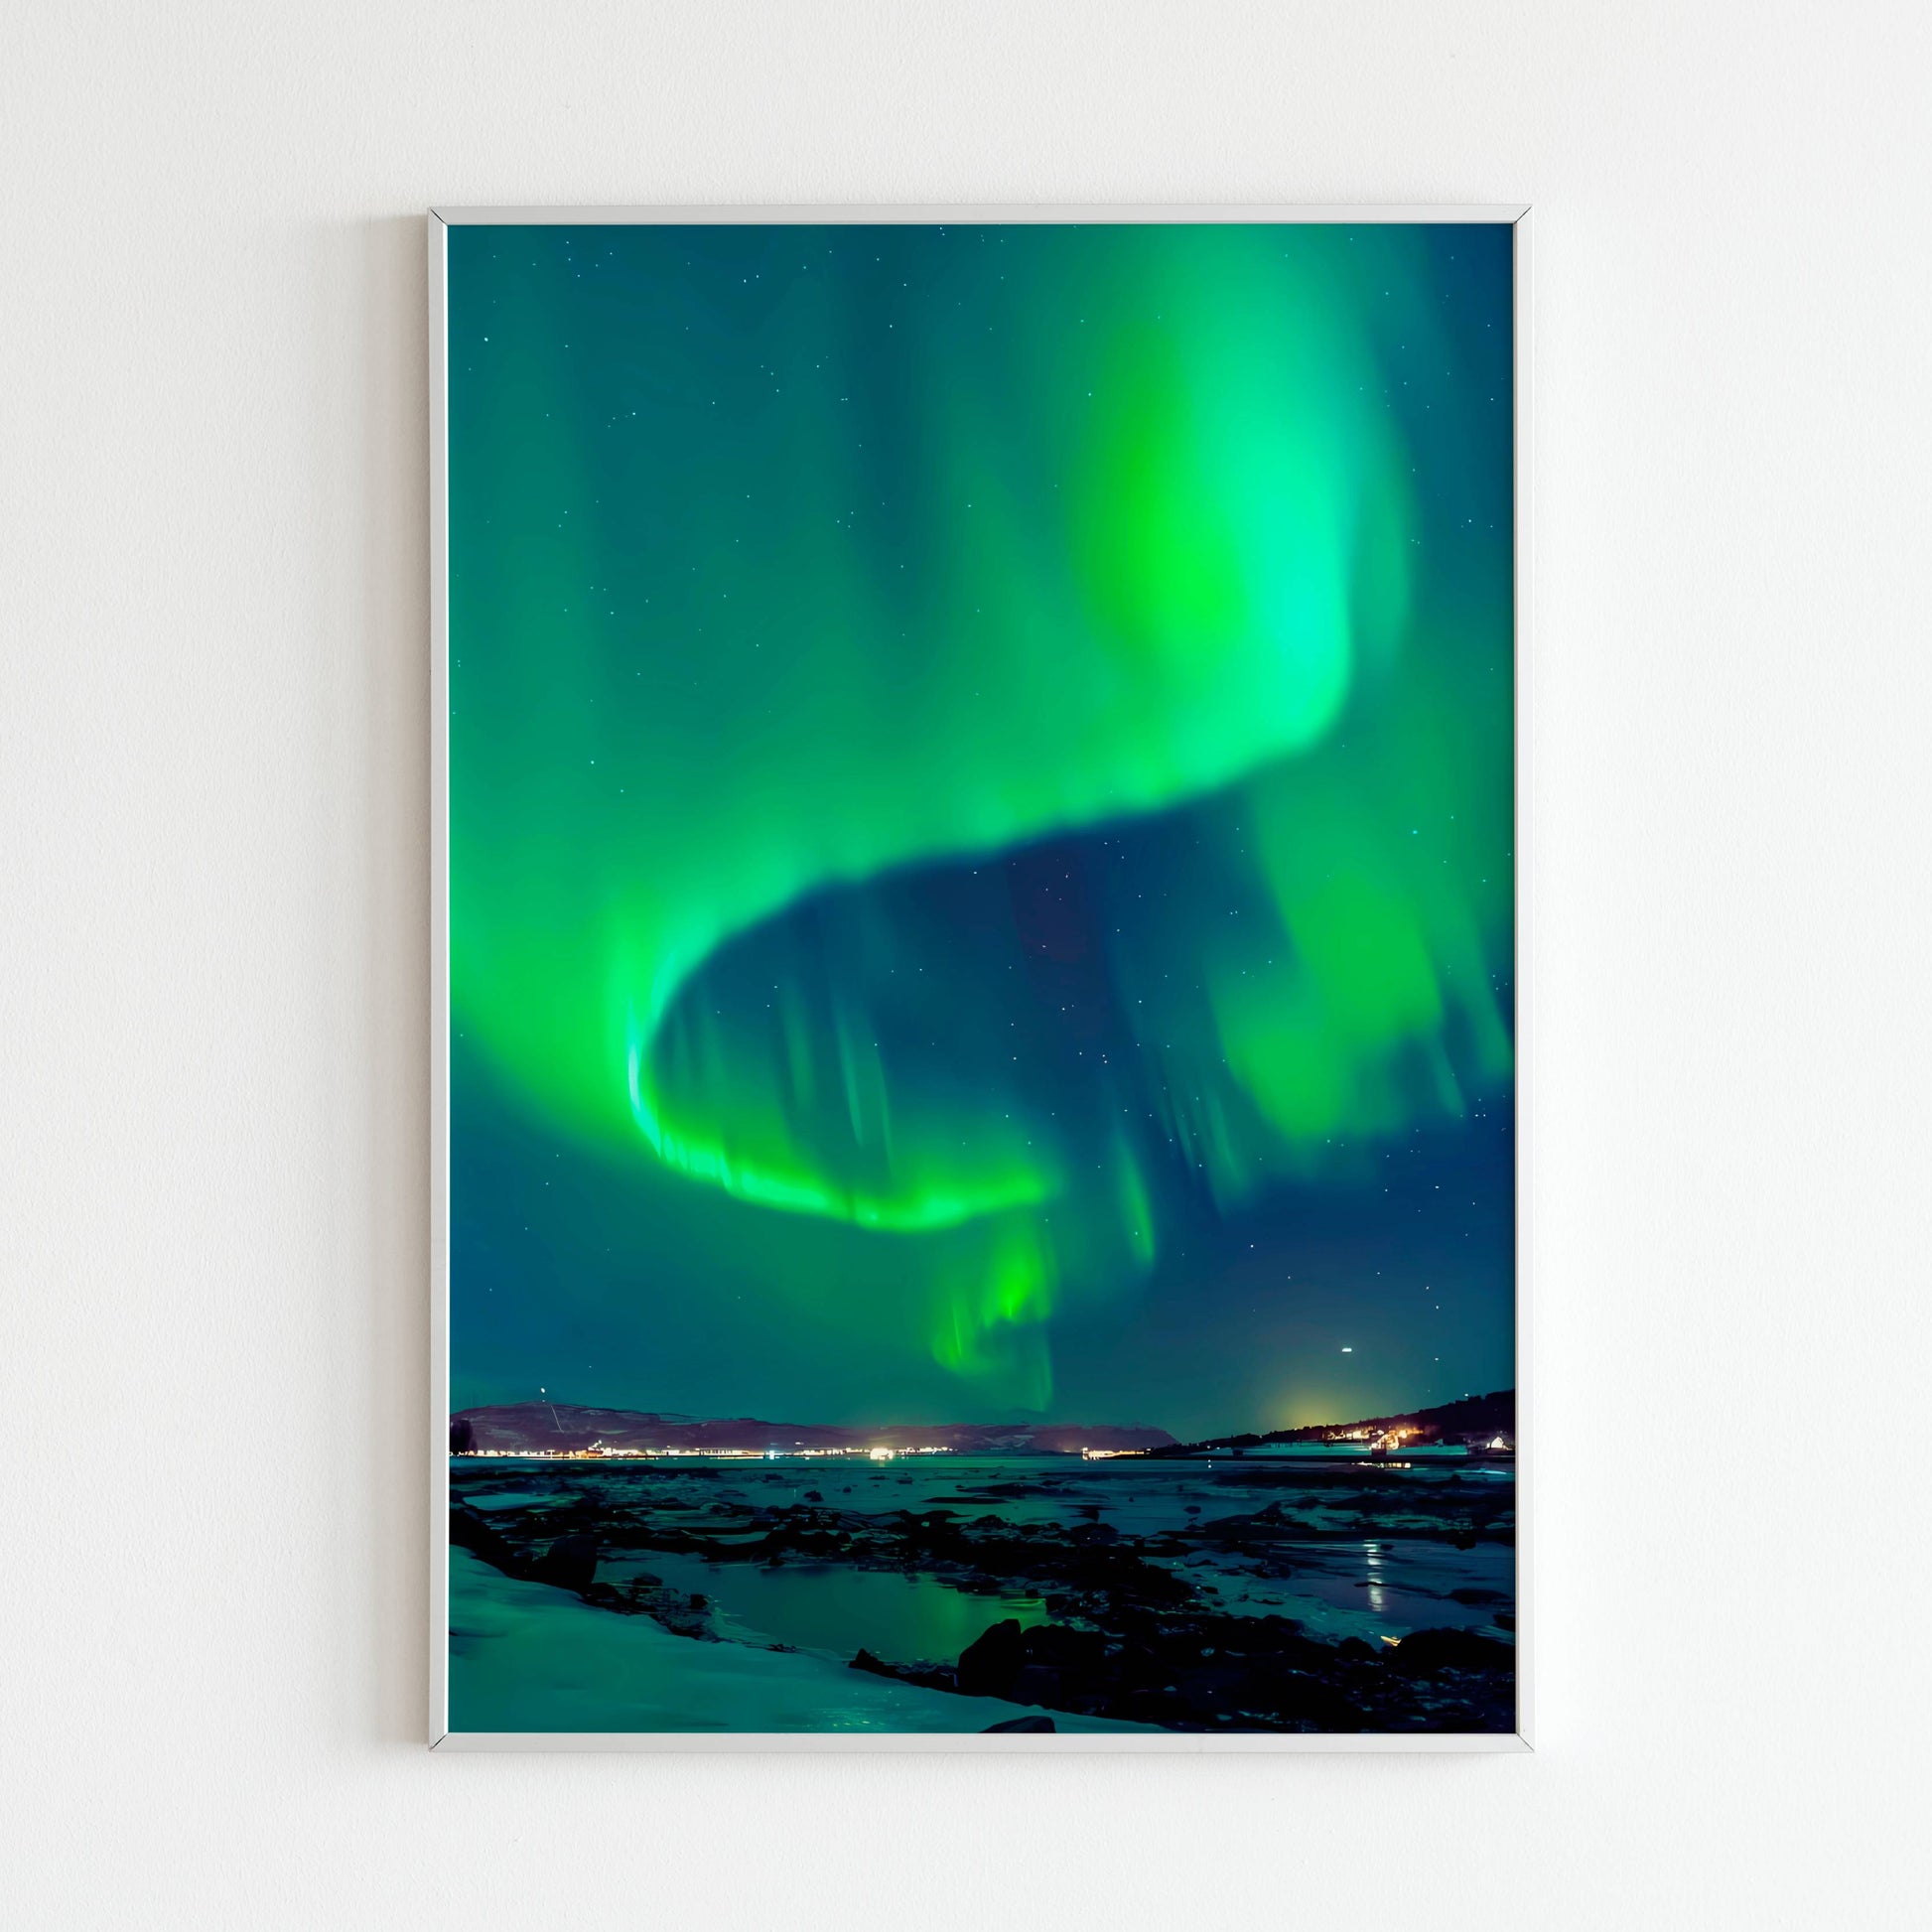 Northern Lights - Printed Wall Art / Poster. This breathtaking aurora borealis poster adds a touch of magic to your space. Arrives ready to hang.